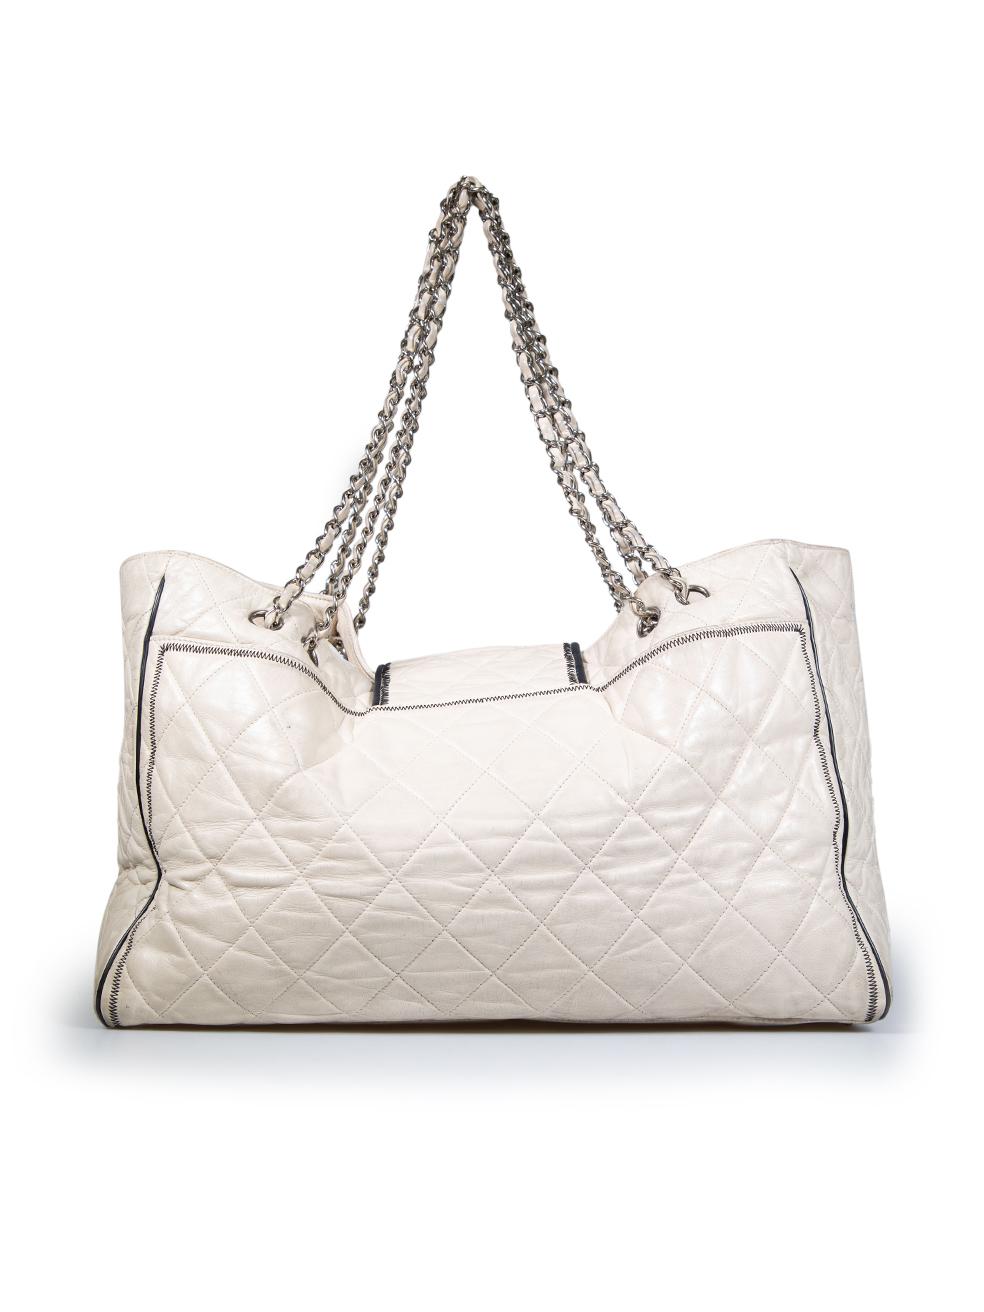 Chanel 2008-2009 Ecru Leather Mademoiselle Lock East West Quilted Tote In Good Condition For Sale In London, GB